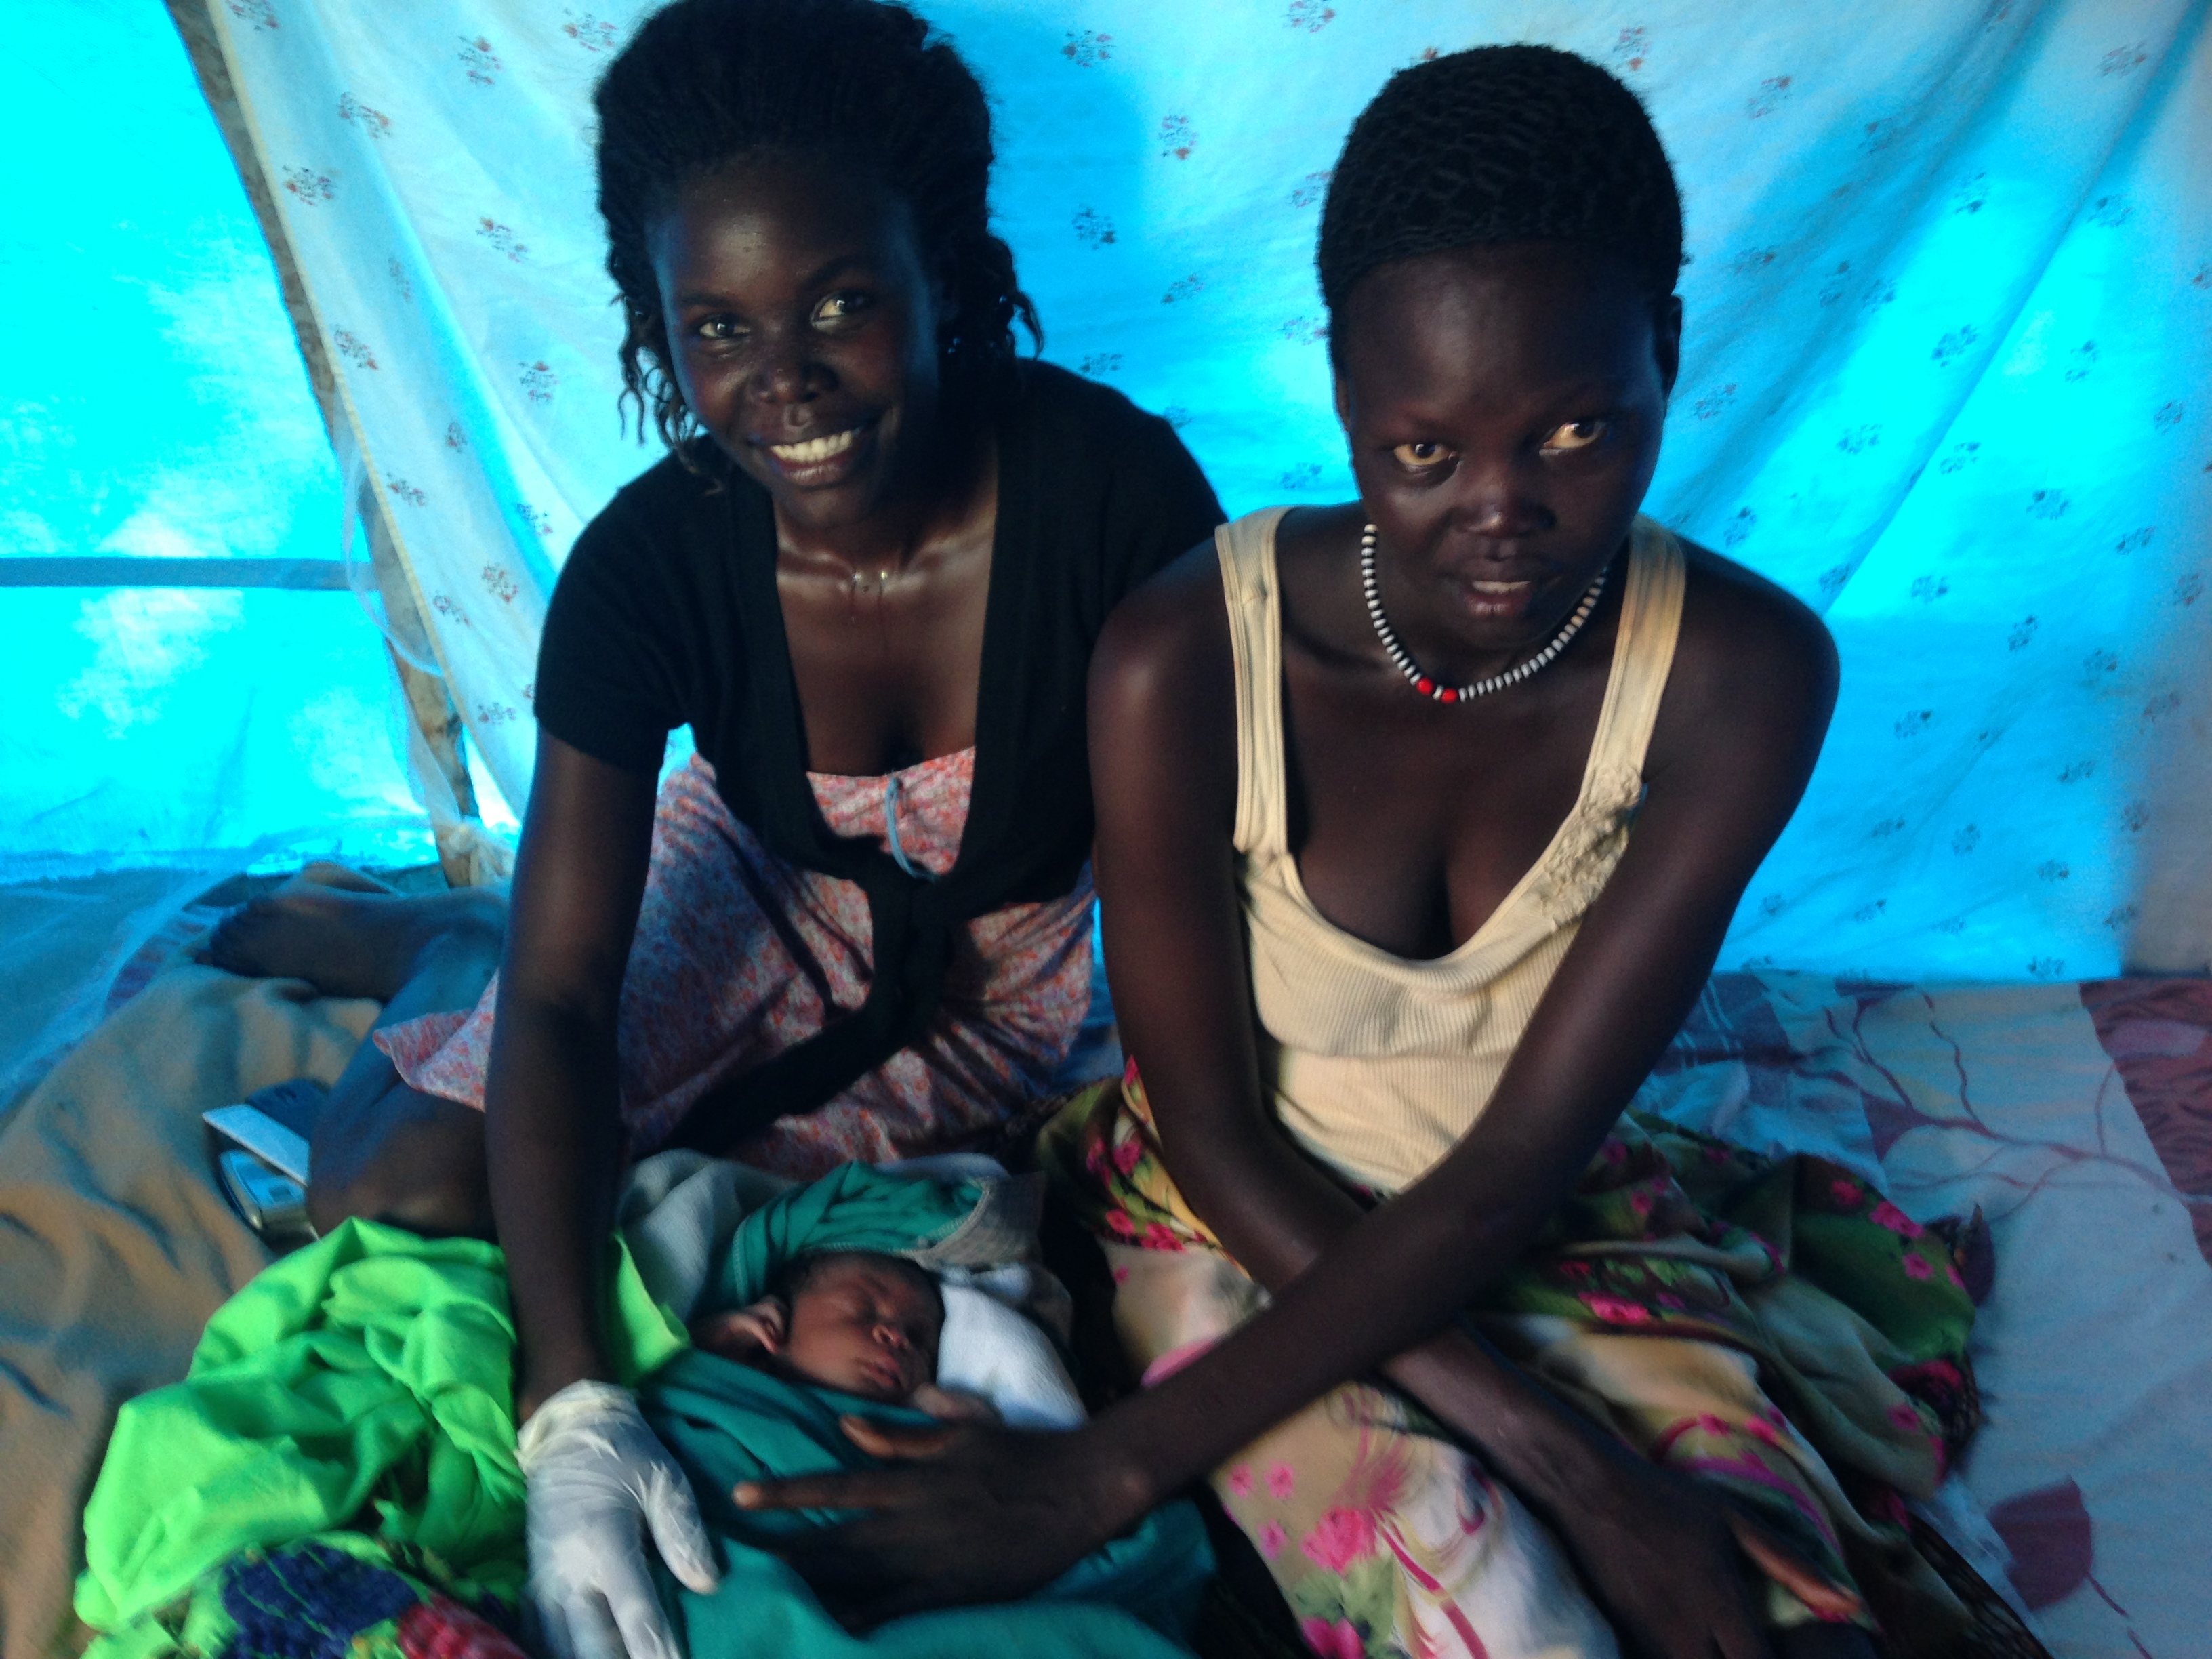 Florence (left) – a trained midwife – checks on the baby, and his mother Kuei, shortly after the baby’s birth. © UNICEF South Sudan/2014/KentPage